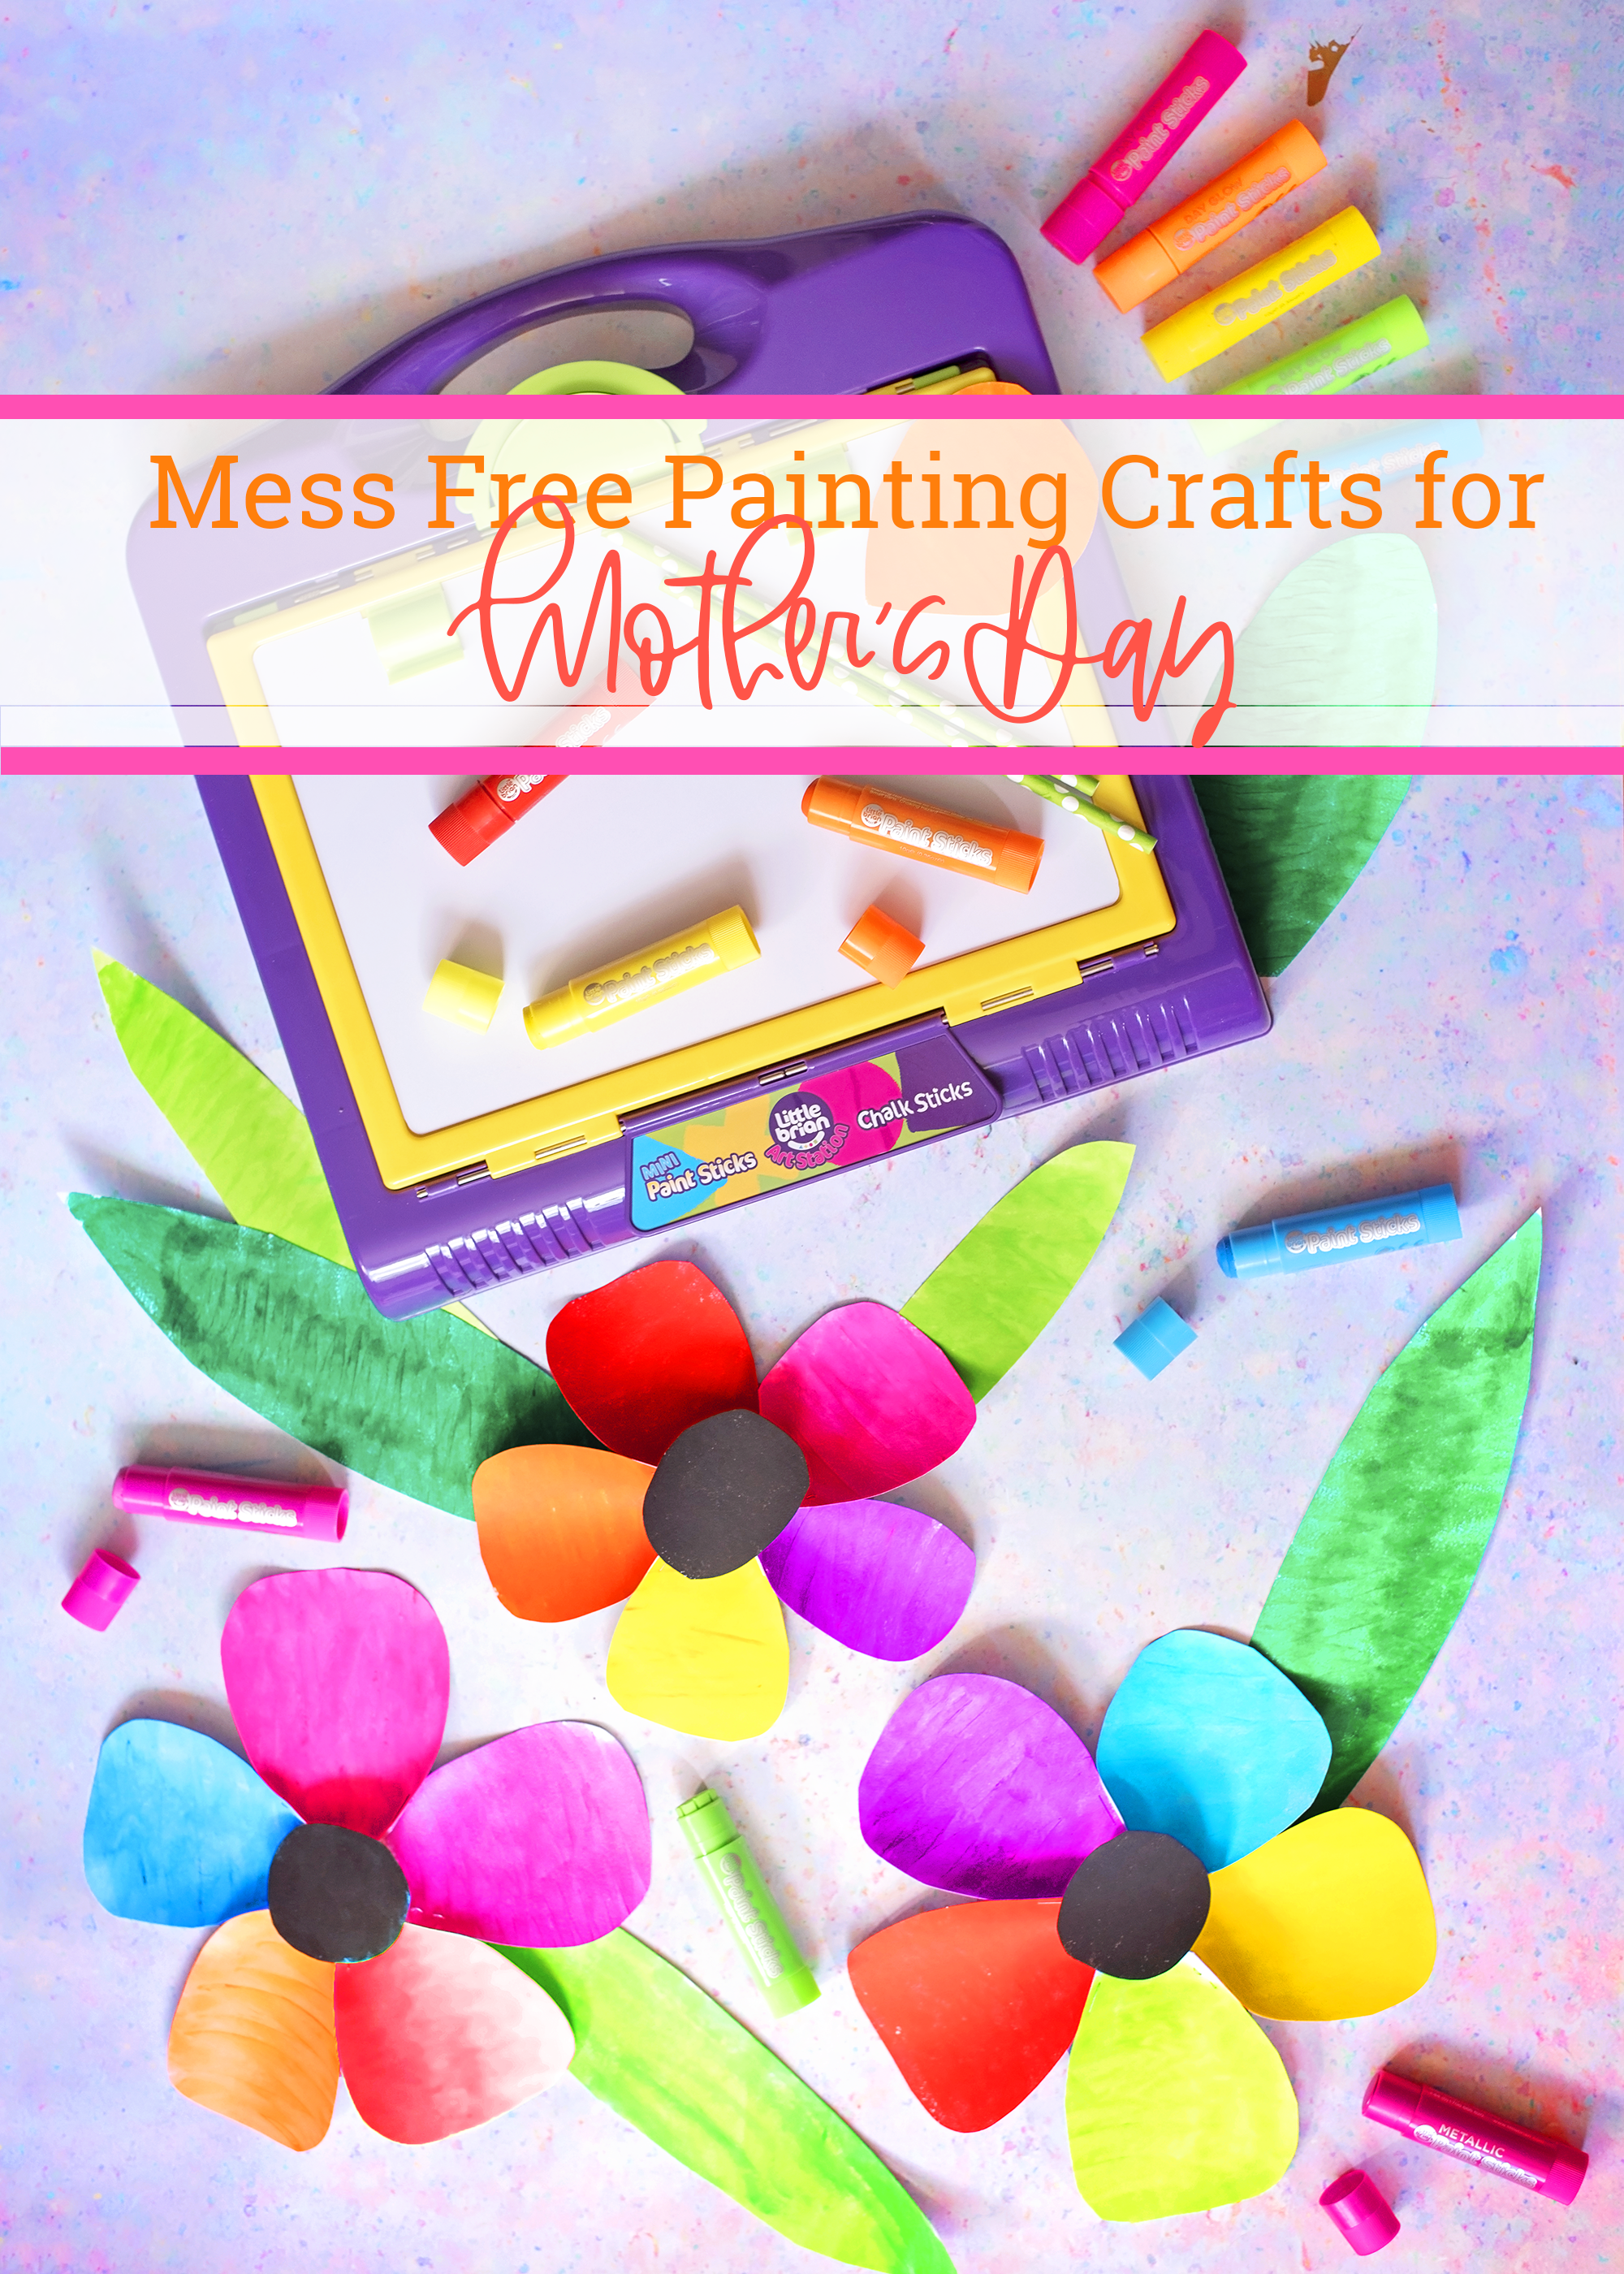 Mess free painting activities for mother's day with paint sticks. Rainbow plates and large rainbow flowers.